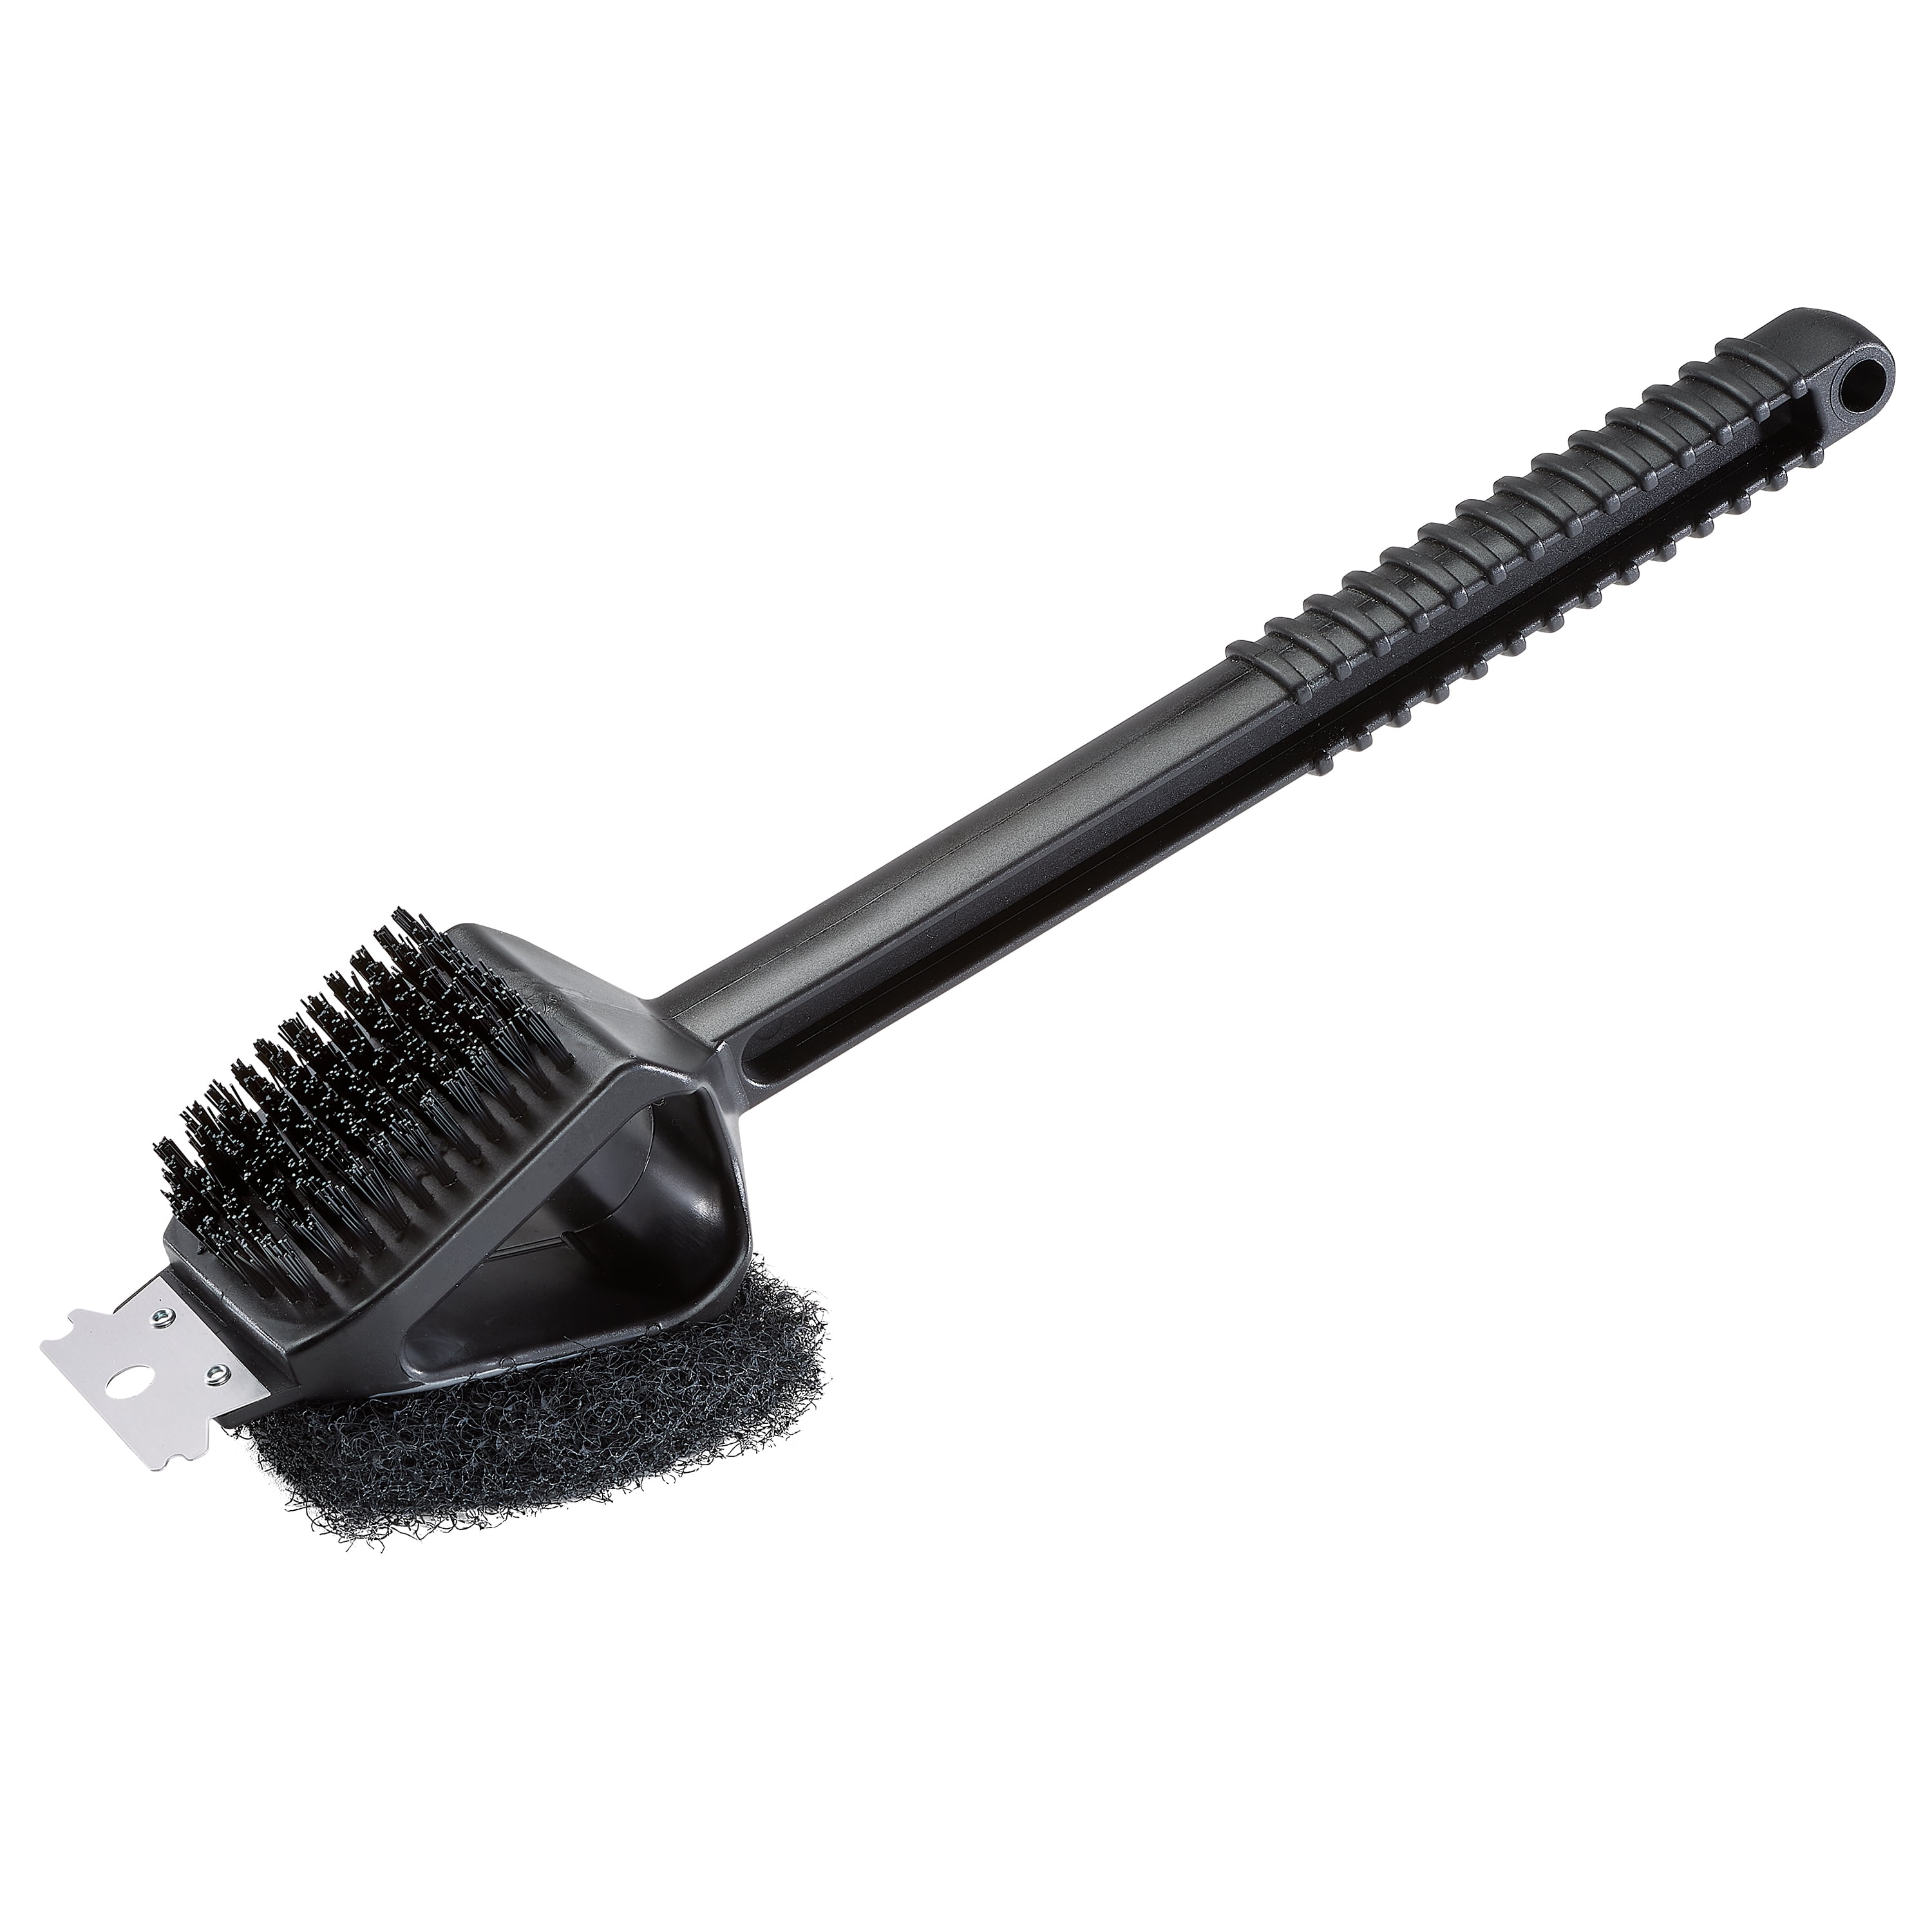 TrimBrush Warm or Hot Clean to 350°F, 3-in-1 XL BBQ Grill Brush